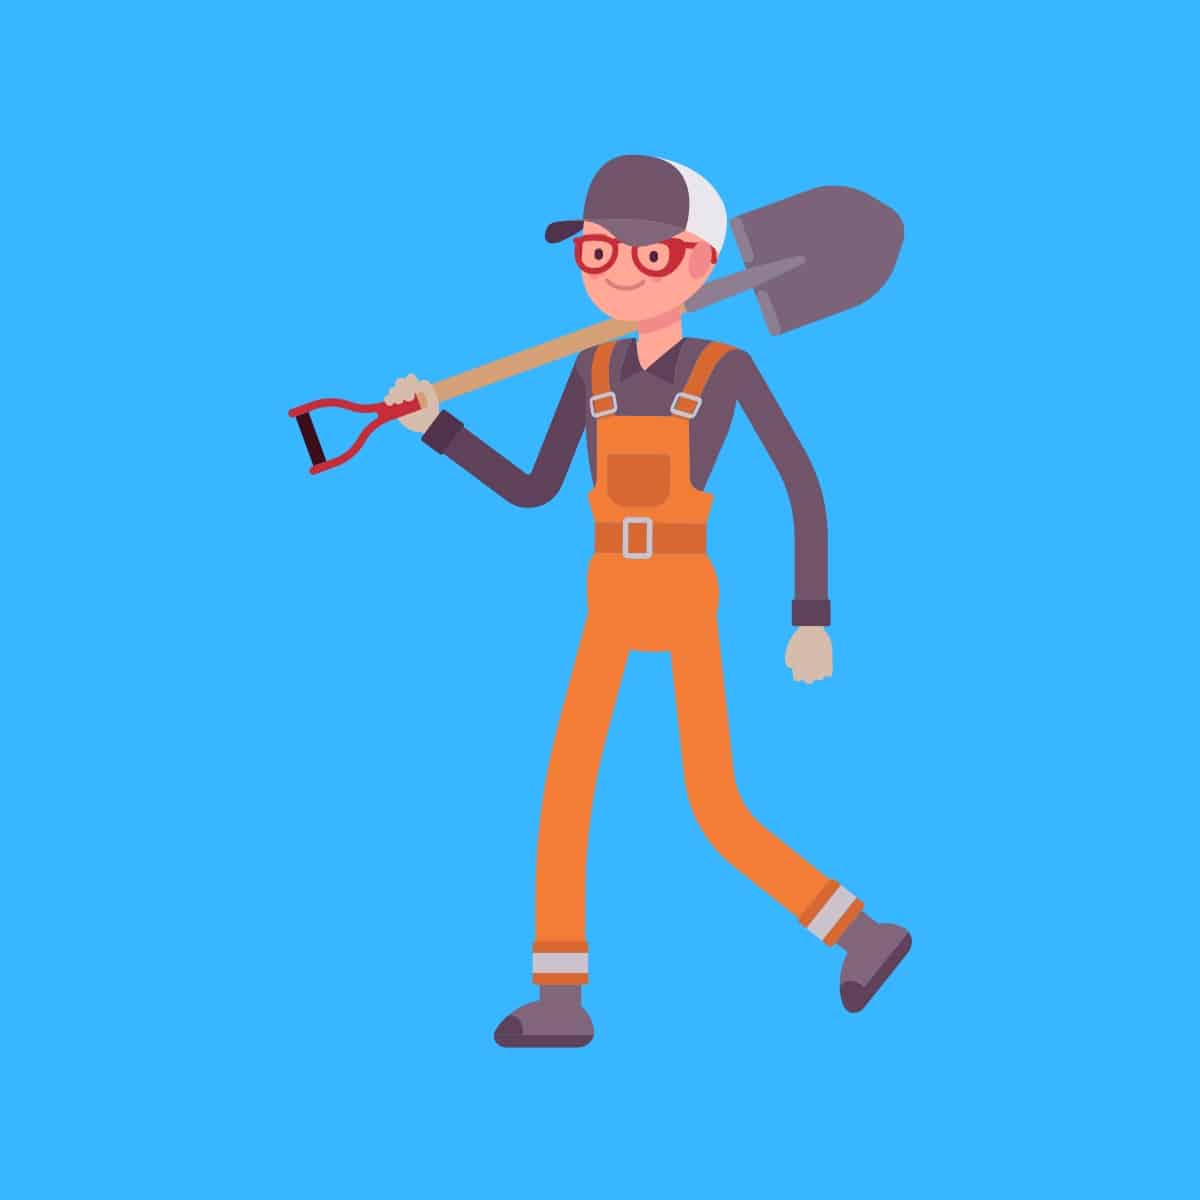 Cartoon graphic of a man holding a shovel over his shoulder on a blue background.